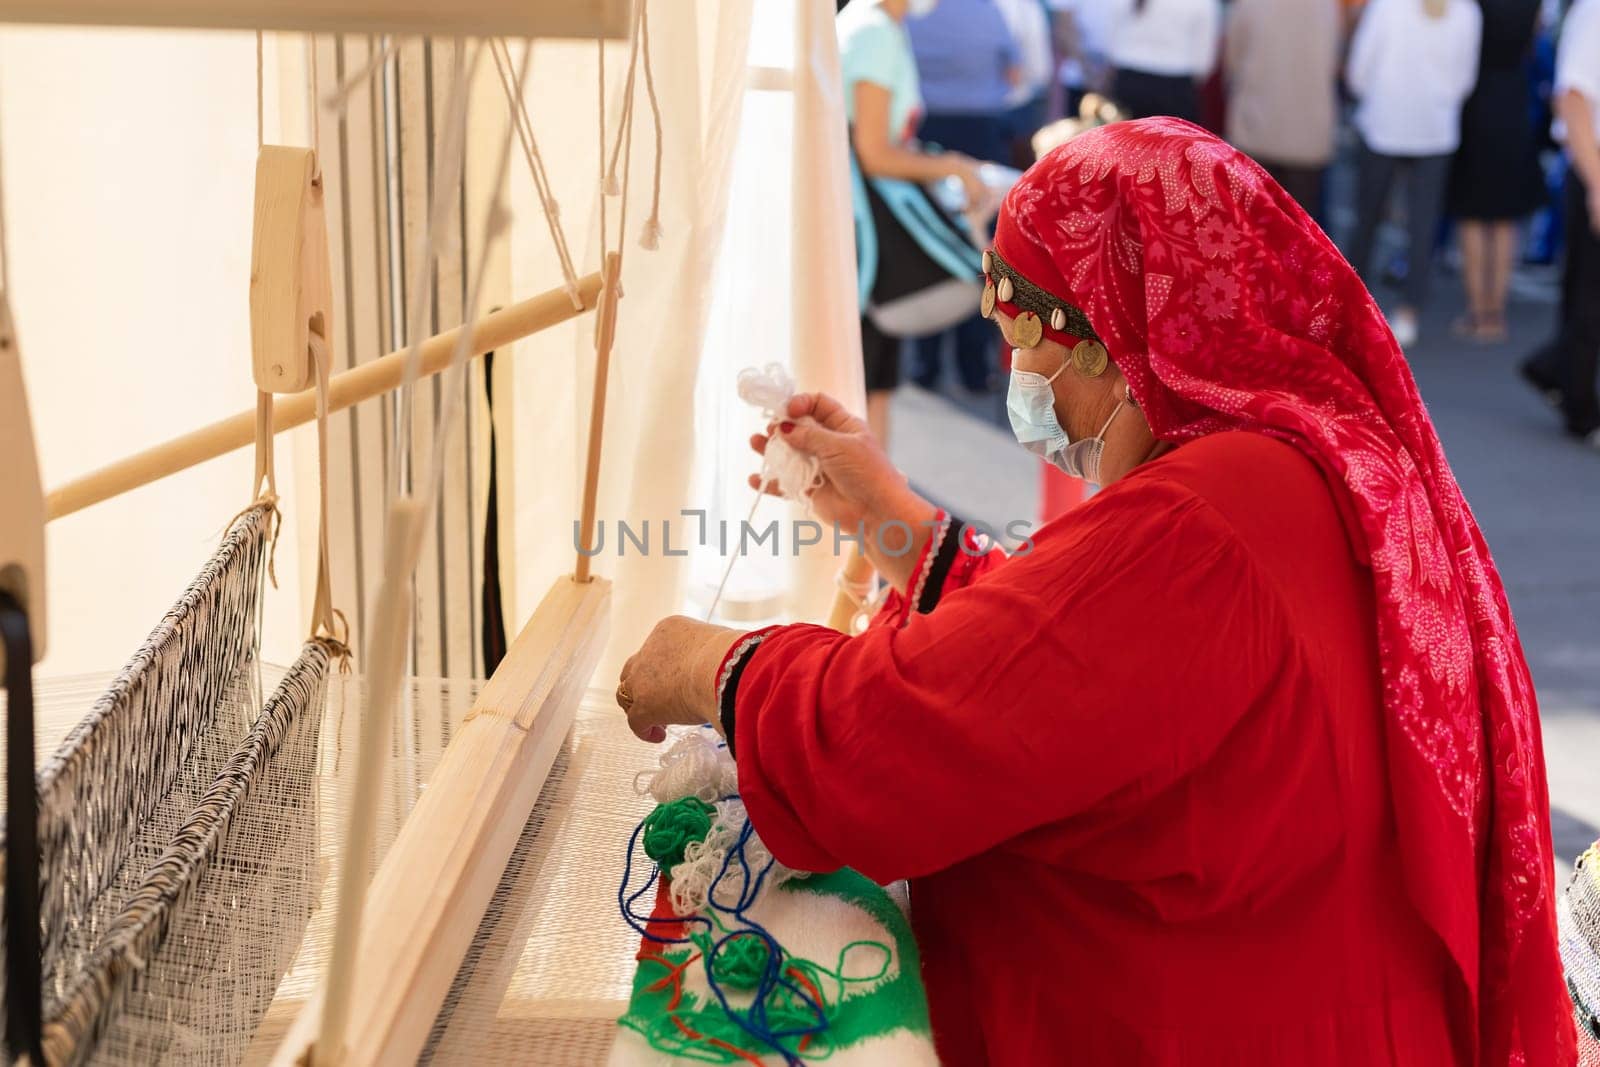 UFA, RUSSIA - JULY 10, 2021: Bashkir woman knitted national clothes during Folkloriada in Ufa by Satura86